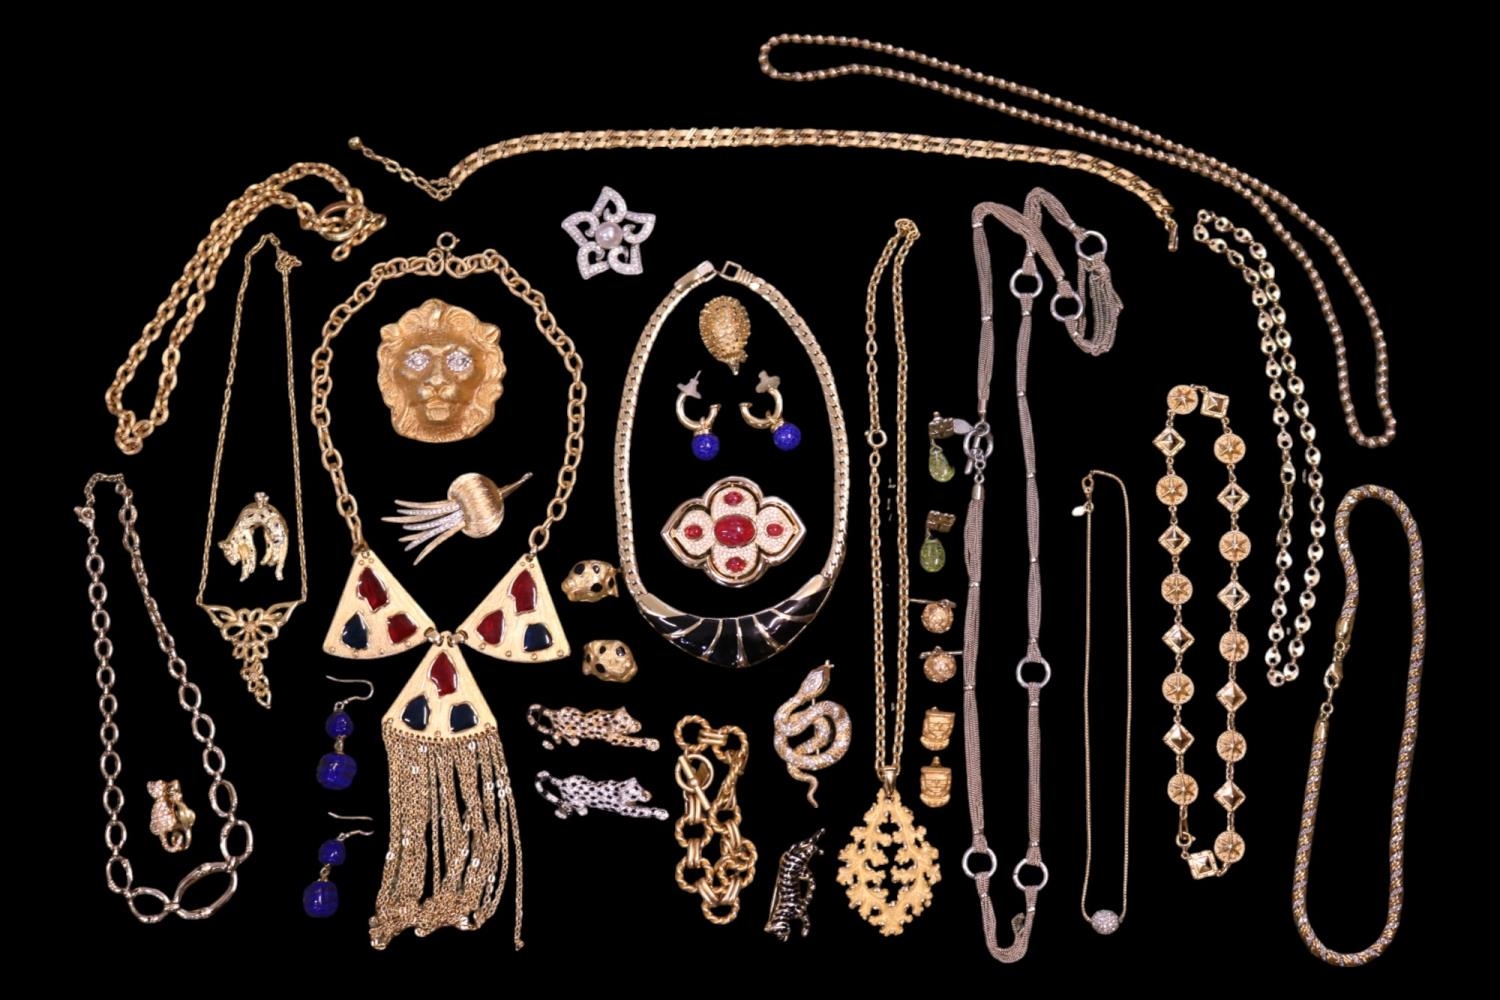 Large collection of Designer Gilt Jewellery to include Monet Necklace, Trifari Necklace, Corocraft